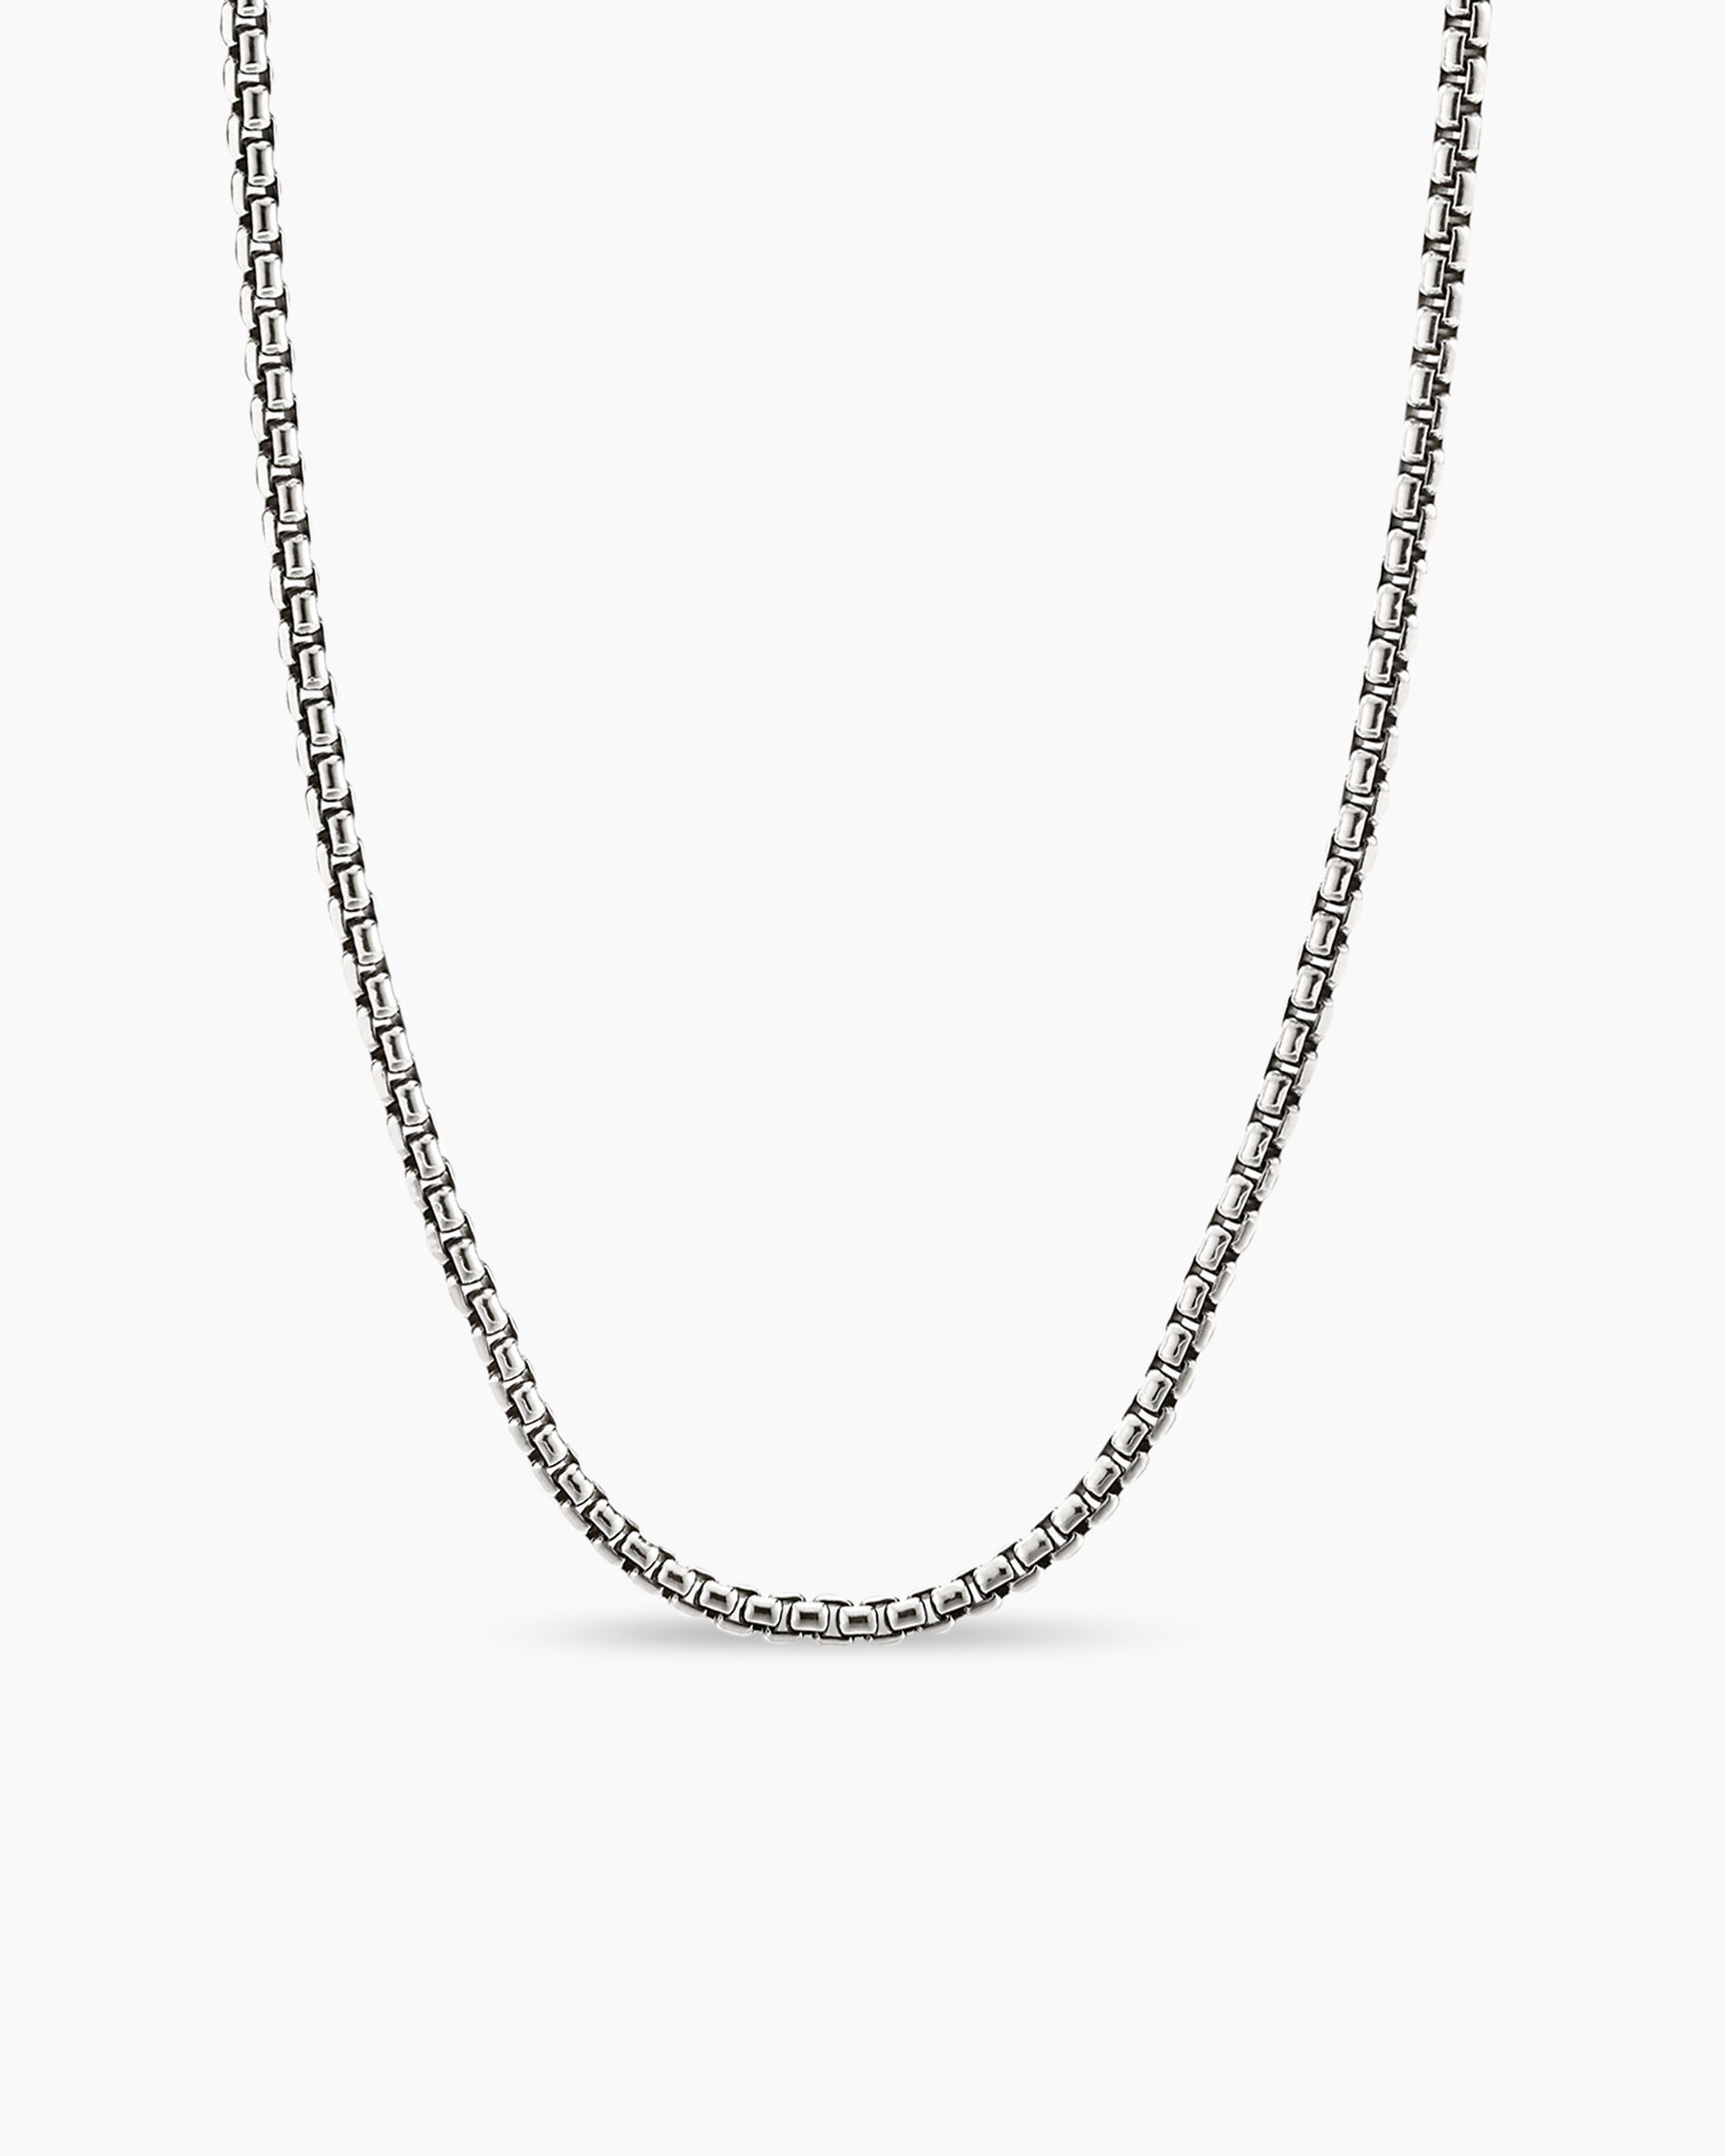 Signature Chain Necklace Extender Size 7mm | WWAKE